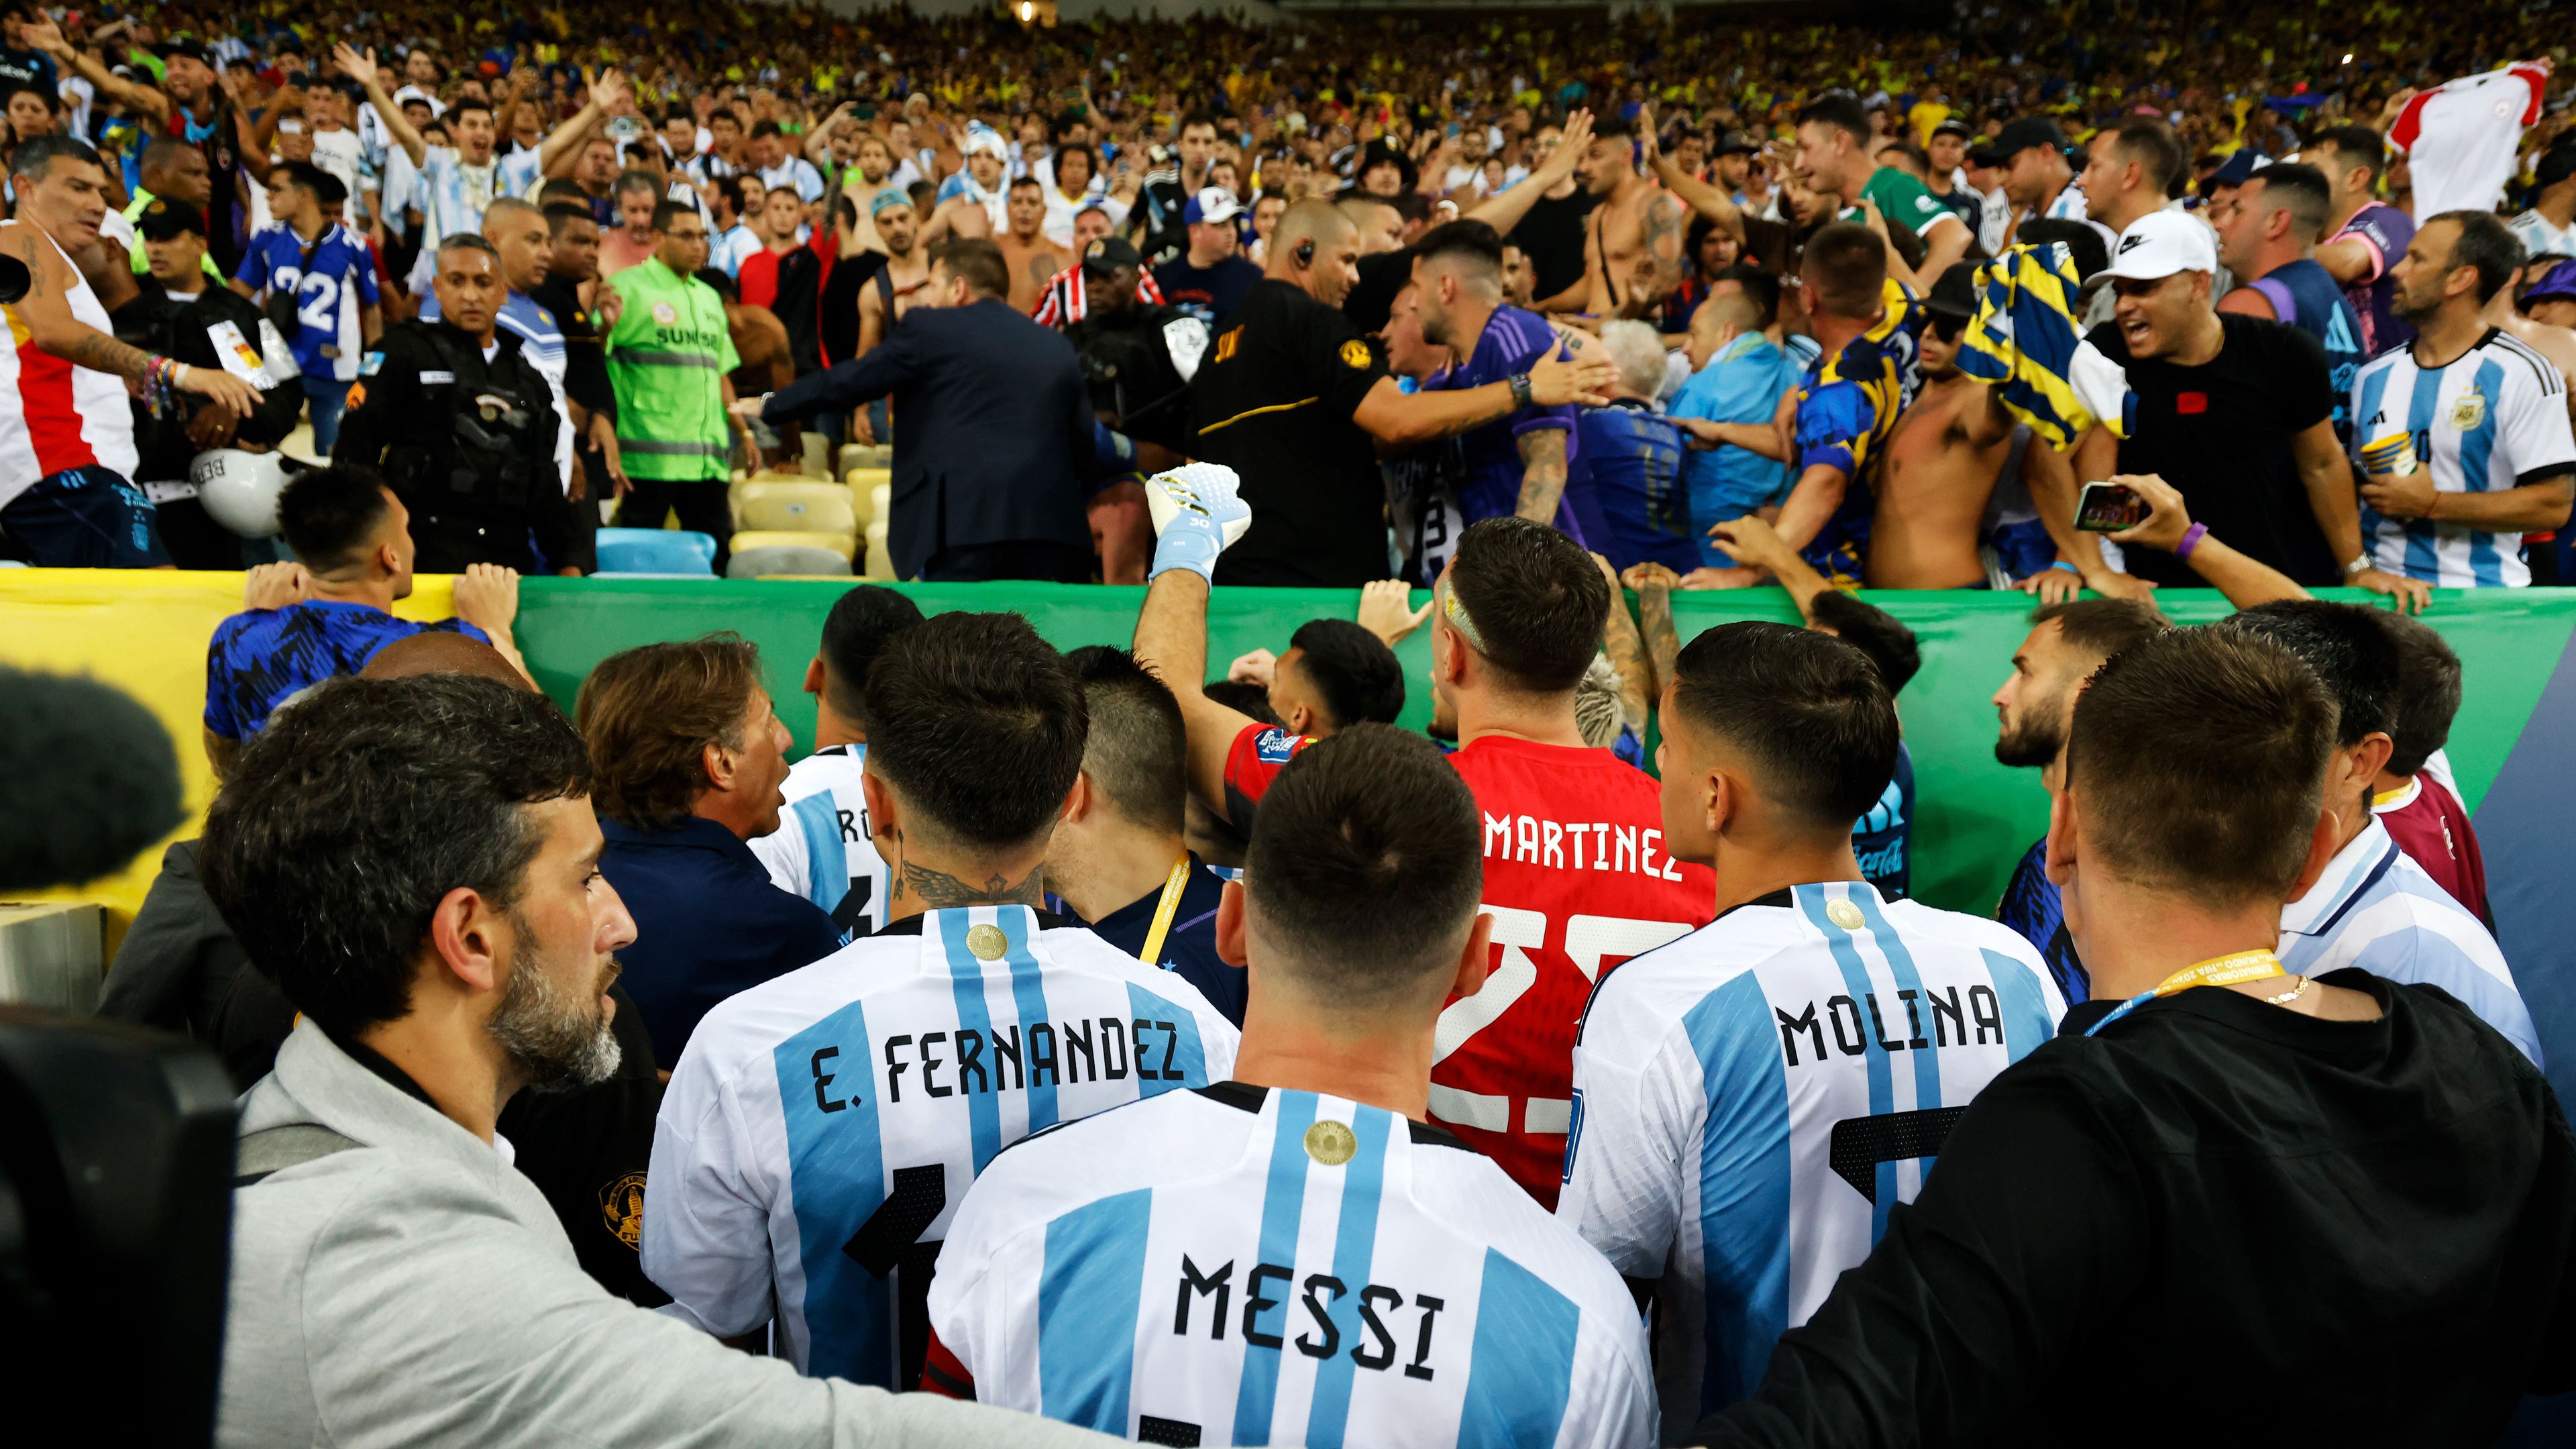 FIFA President’s Unexpected Statement on Brazil-Argentina Incident